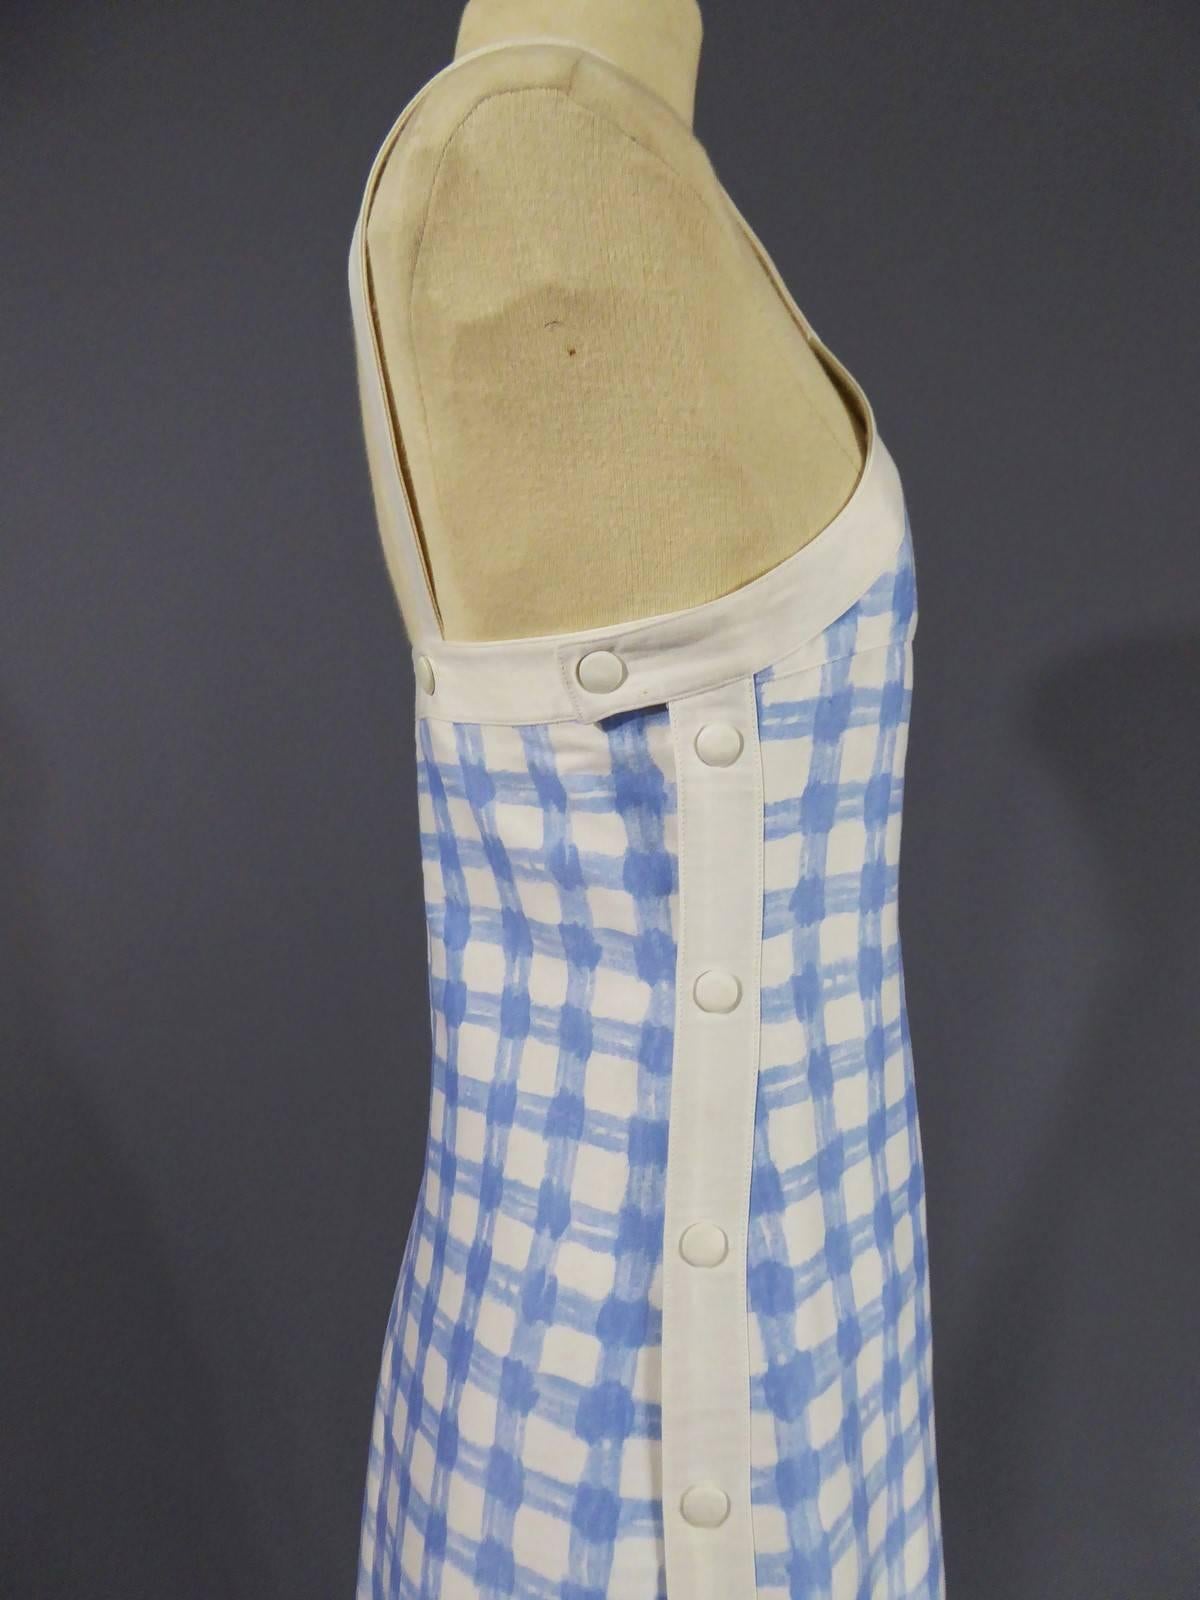 Circa 1970

France.

A Long maxi dress from André Courrèges, Taty Inspiration. Closes with 15 snaps on each side of the dress. Straps closed by press studs in white. Cotton jersey printed in the style of painted Vichy blue pattern, gingham, on a